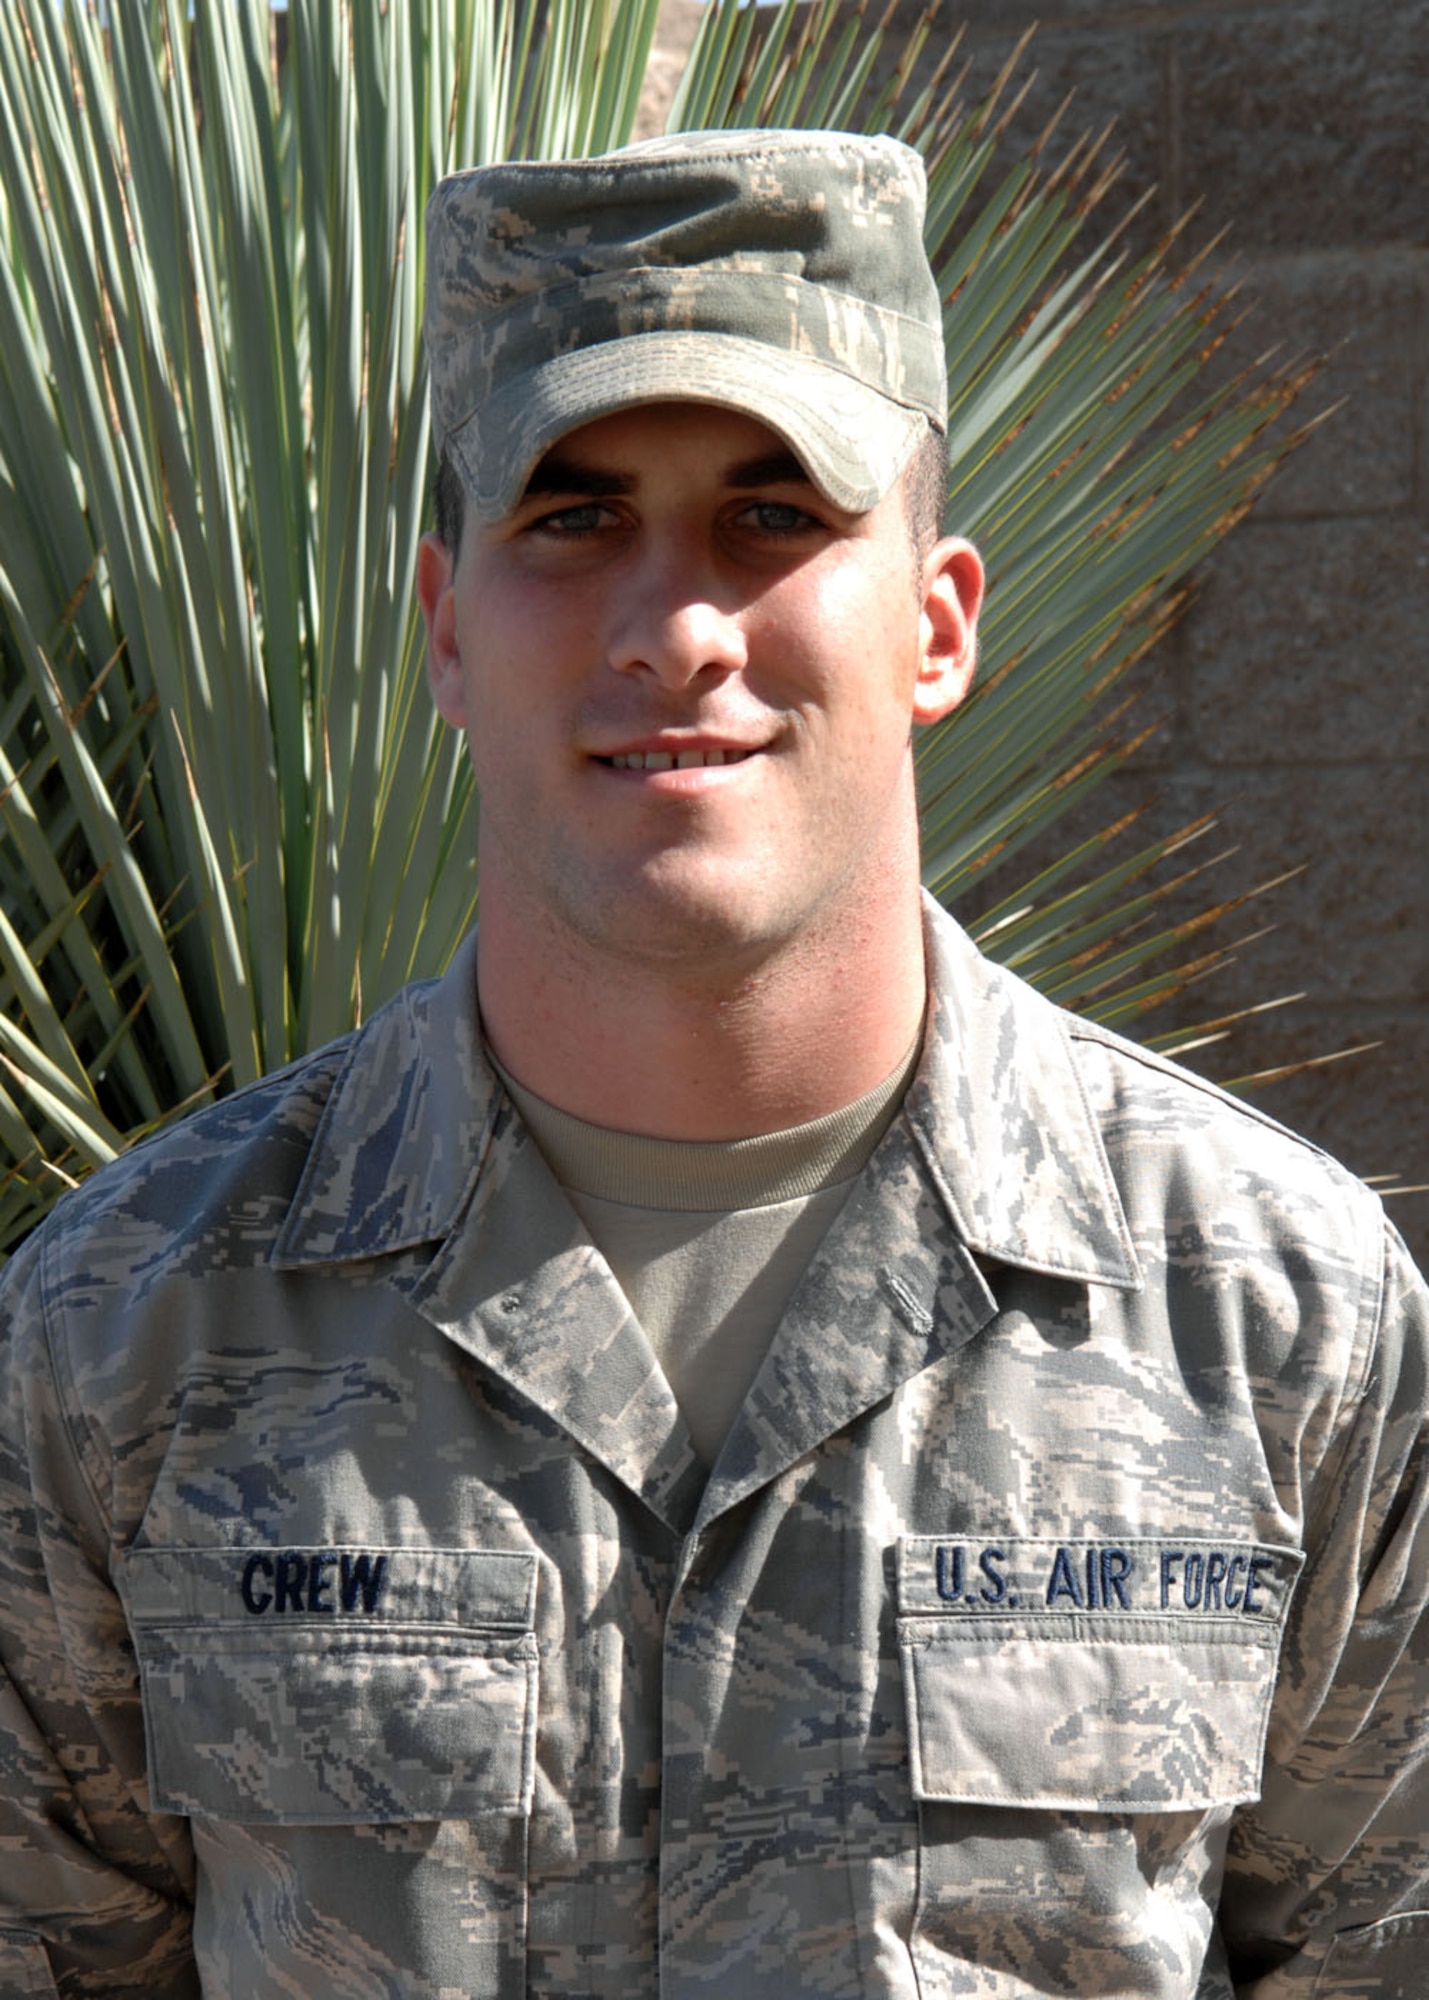 Warrior of the Week: Airman 1st Class William M. Crew